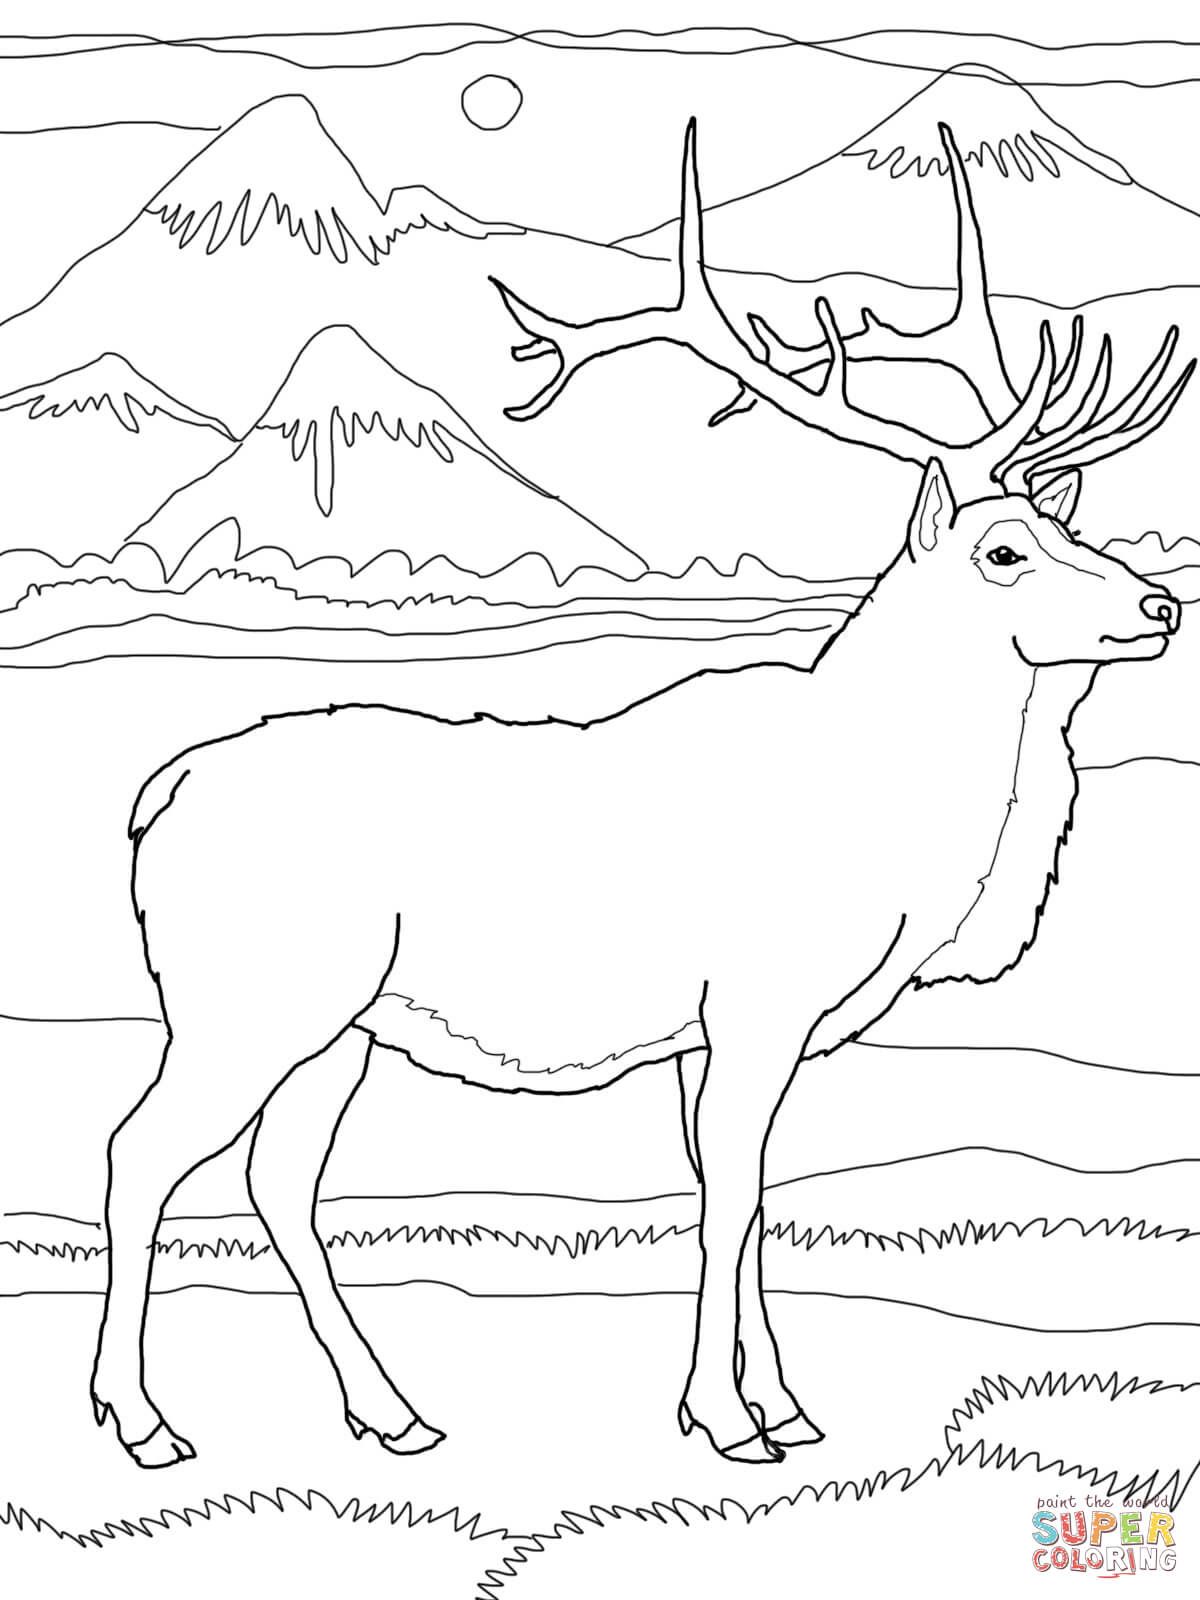 Elk or wapiti coloring page from elk category select from printable crafts of cartoons nâ deer coloring pages super coloring pages online coloring pages